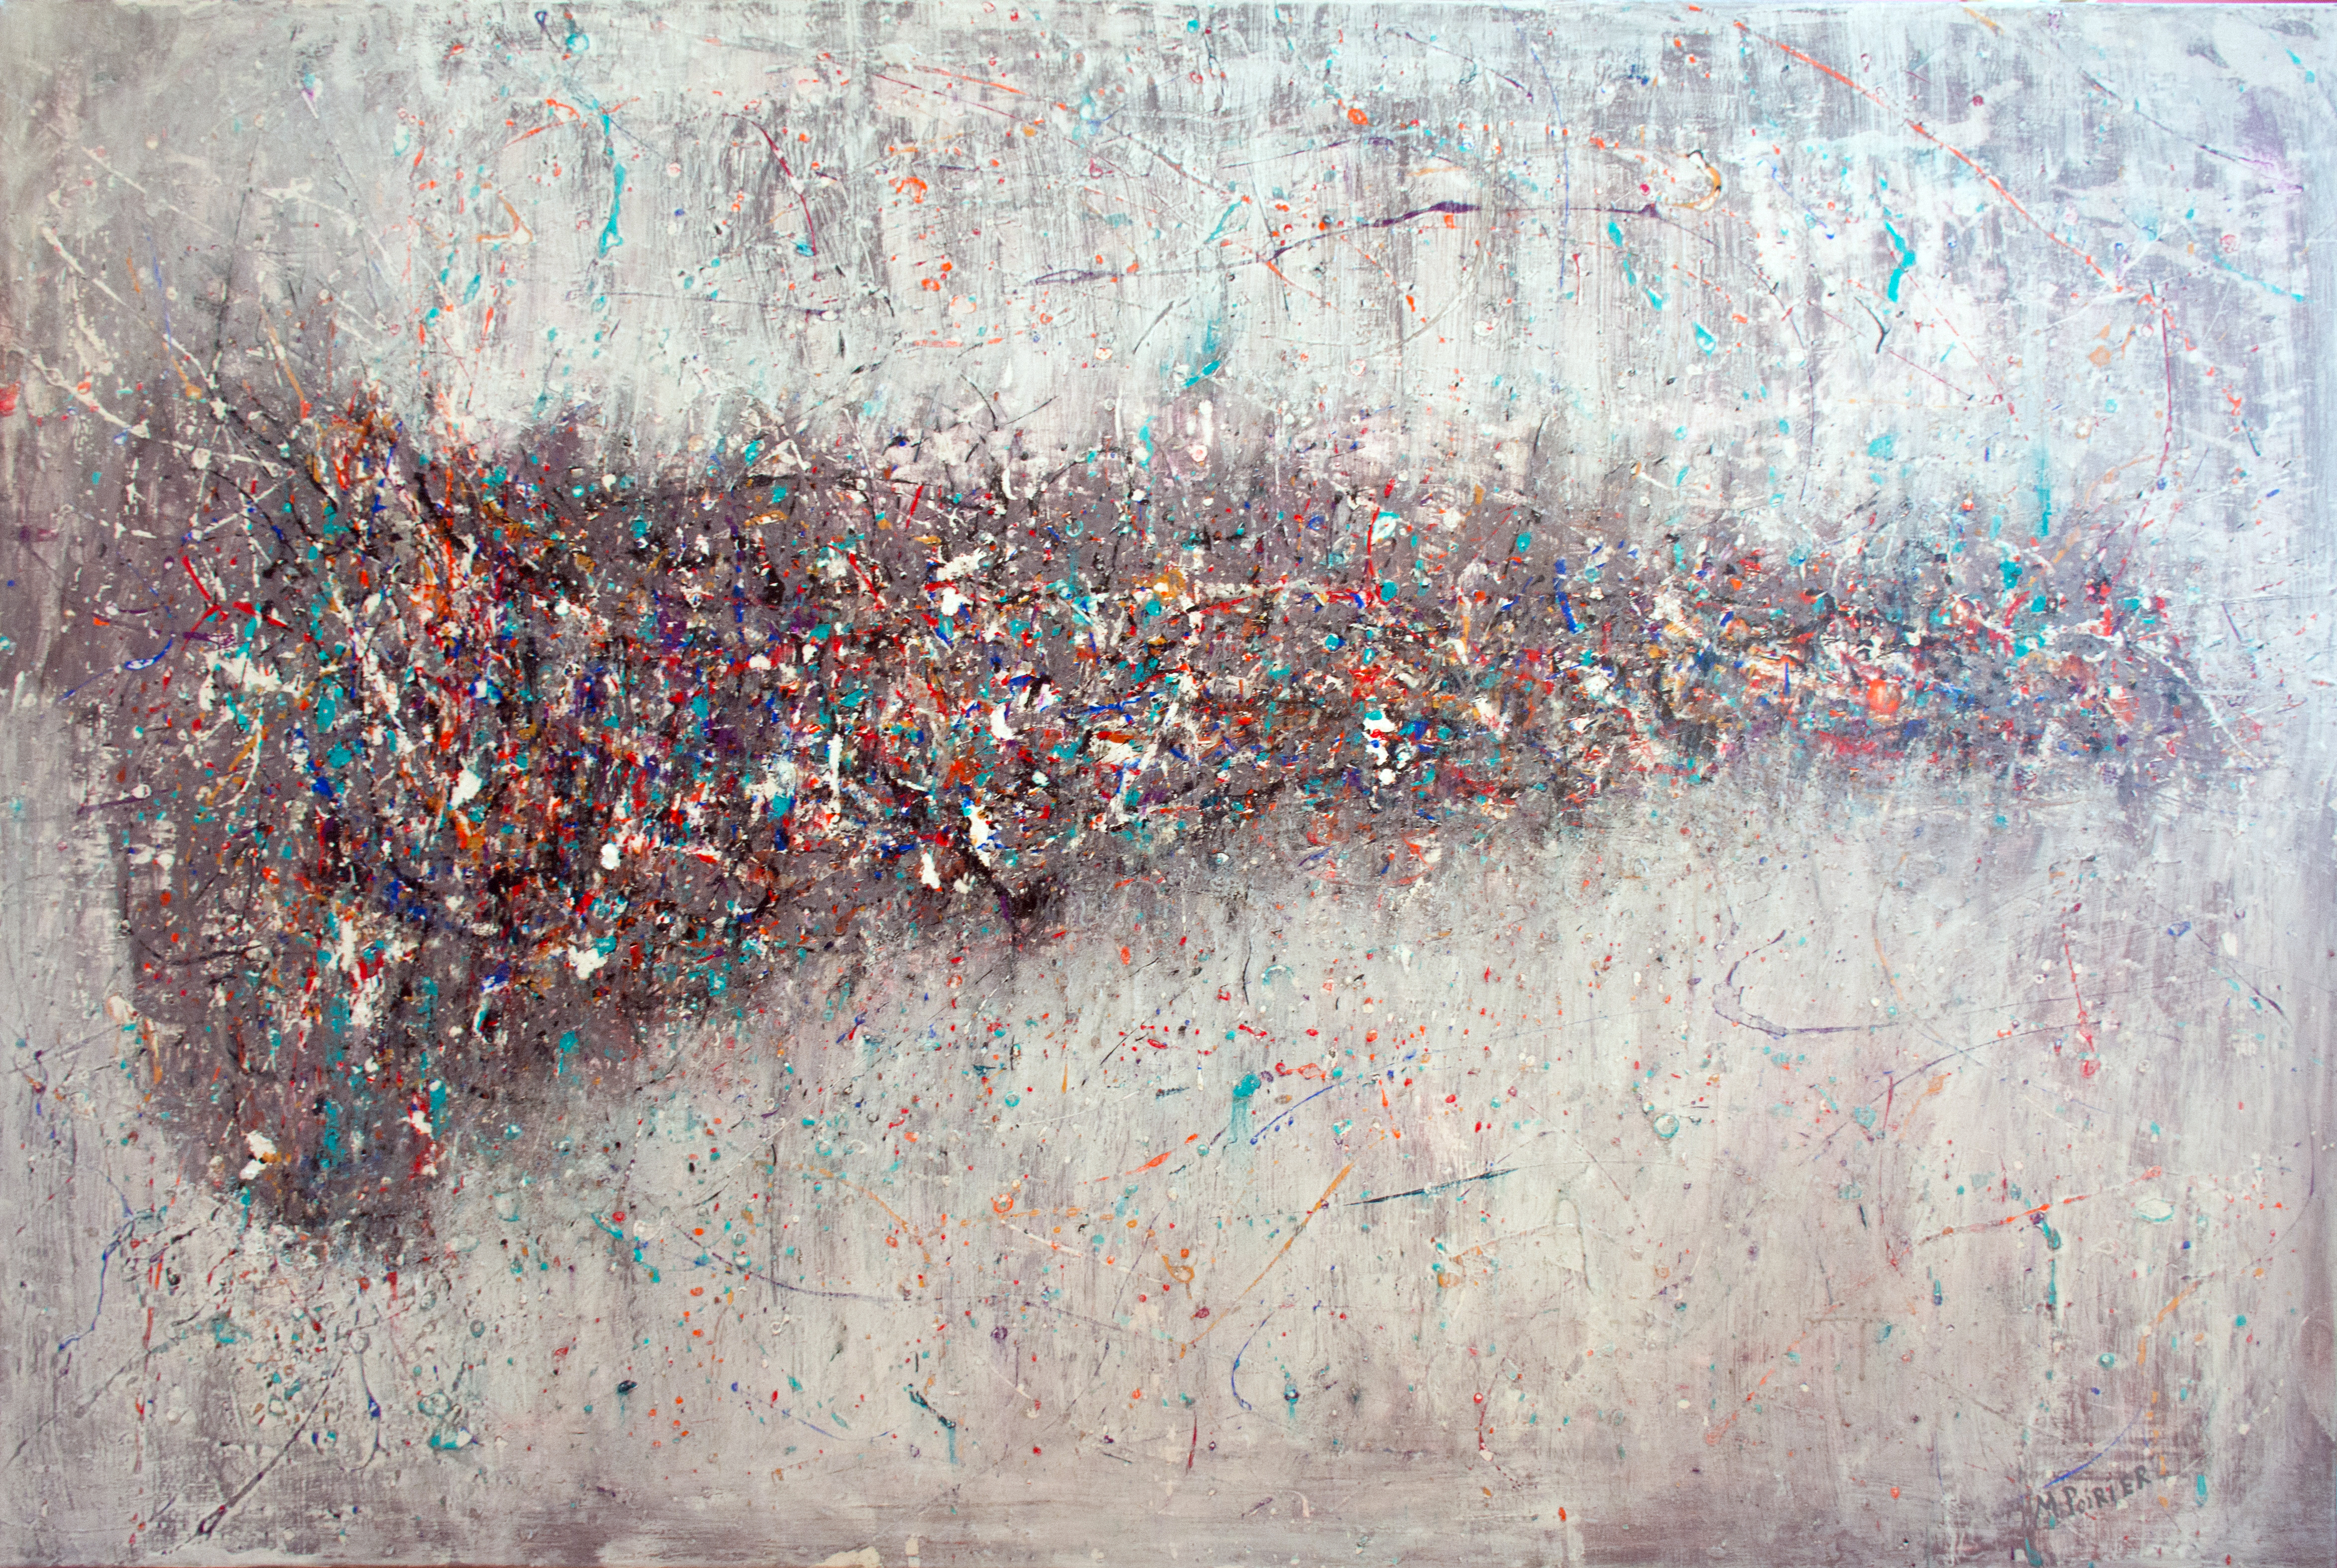 TRIP
60x40 inches, 152x102 centimeters